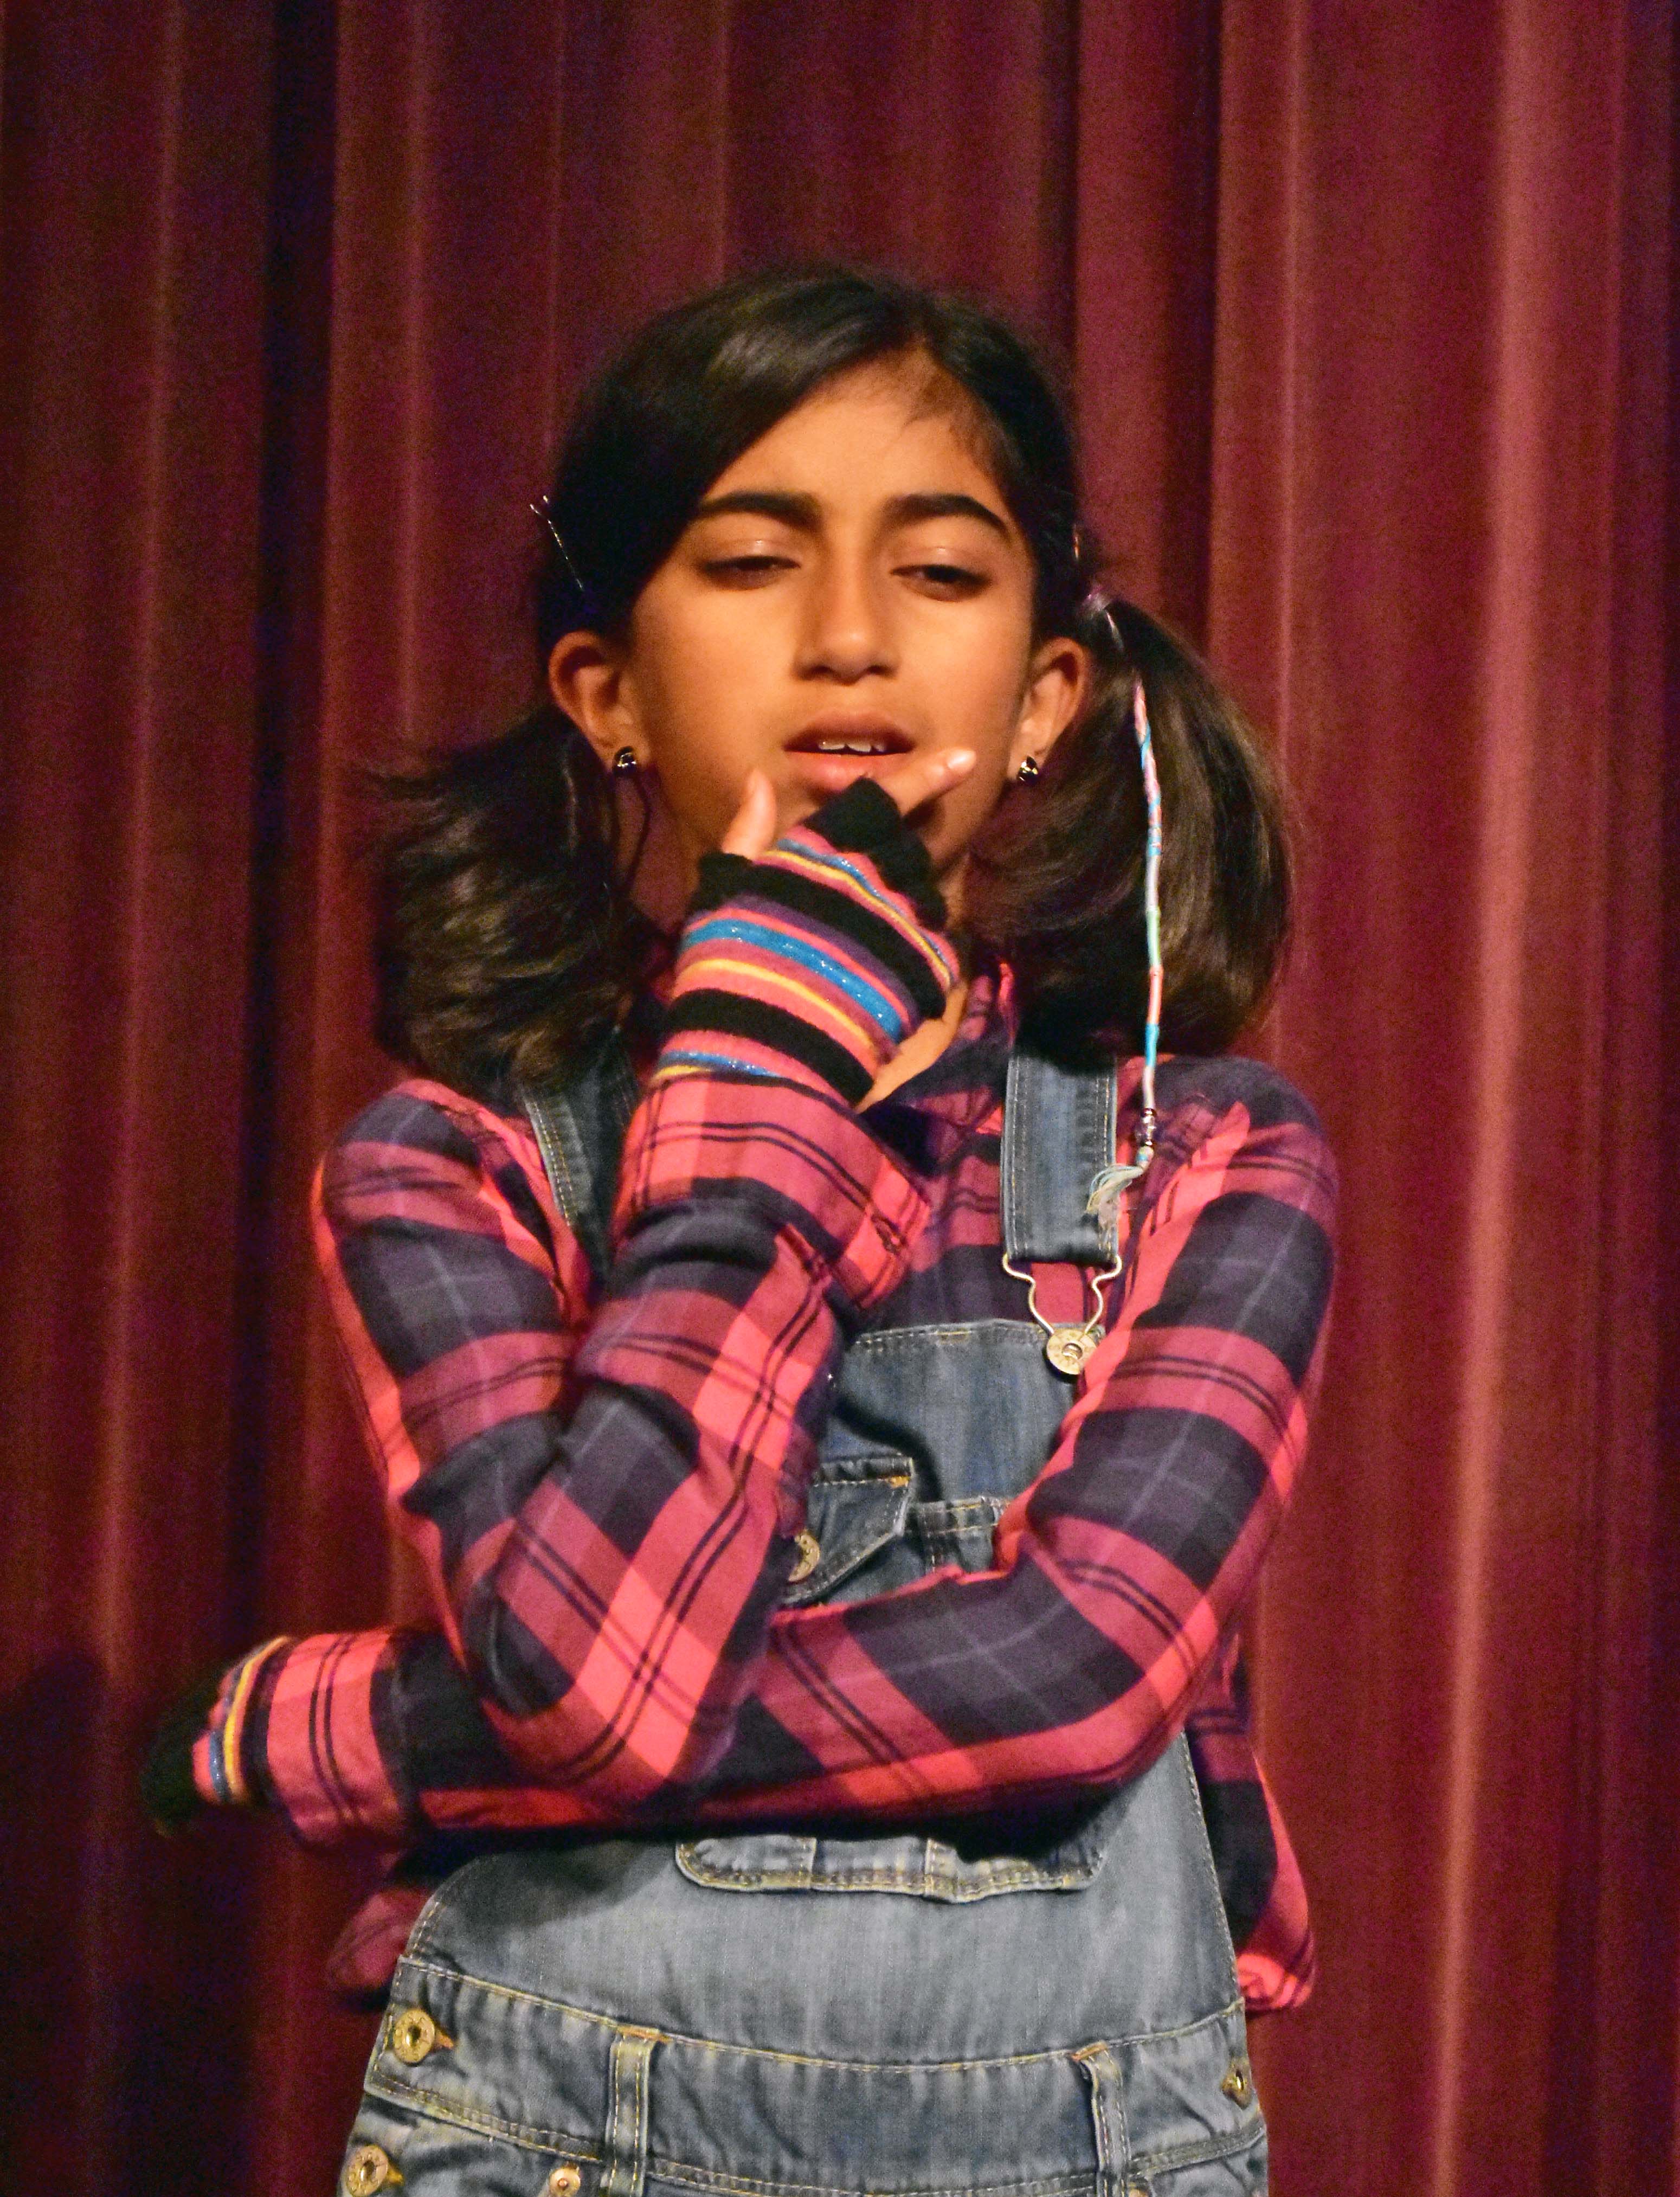 ppf-the-best-christmas-pageant-ever-kashvi-ramani-as-loretta-herdman-photo-by-chip-gertzog-providence-players